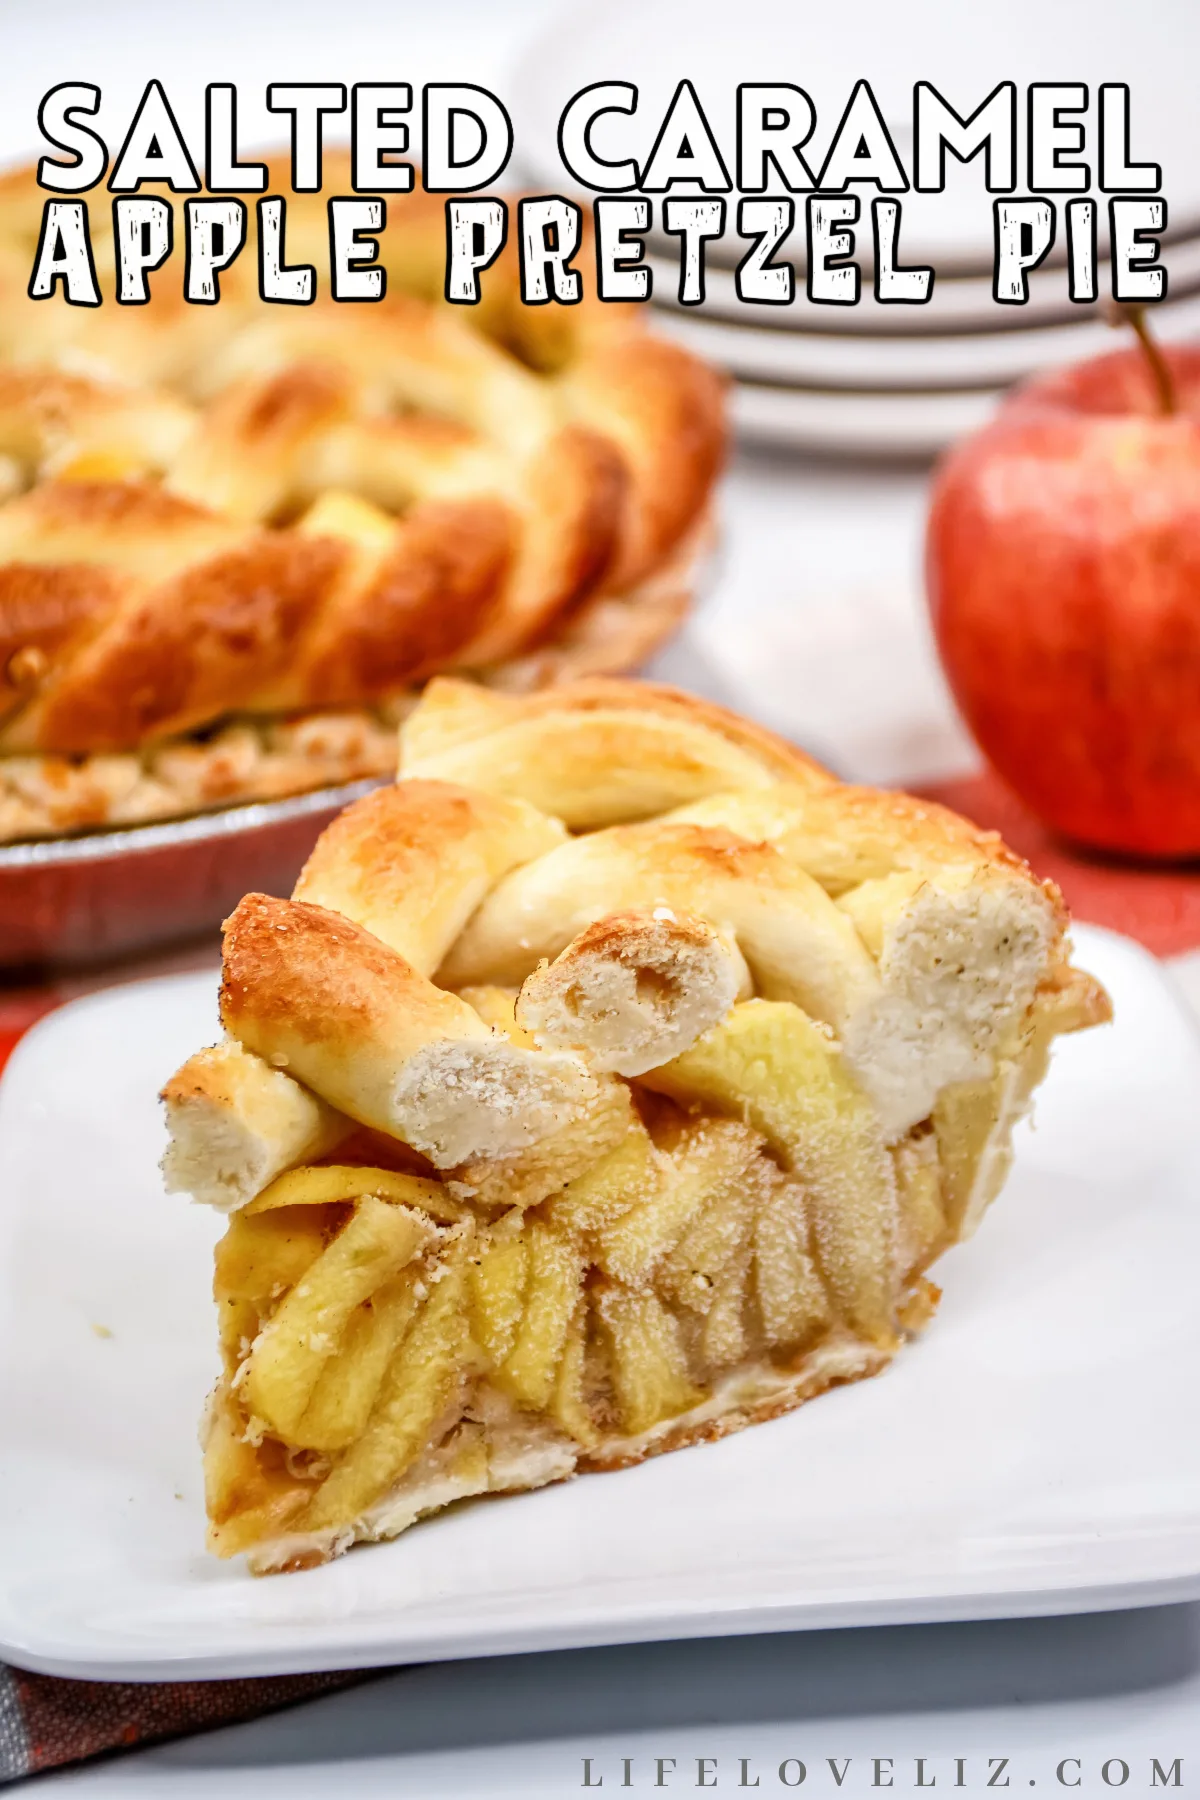 The perfect fall dessert with apples, caramel and pretzel – this Salted Caramel Apple Pretzel Pie Recipe is sweet, salty and creamy.